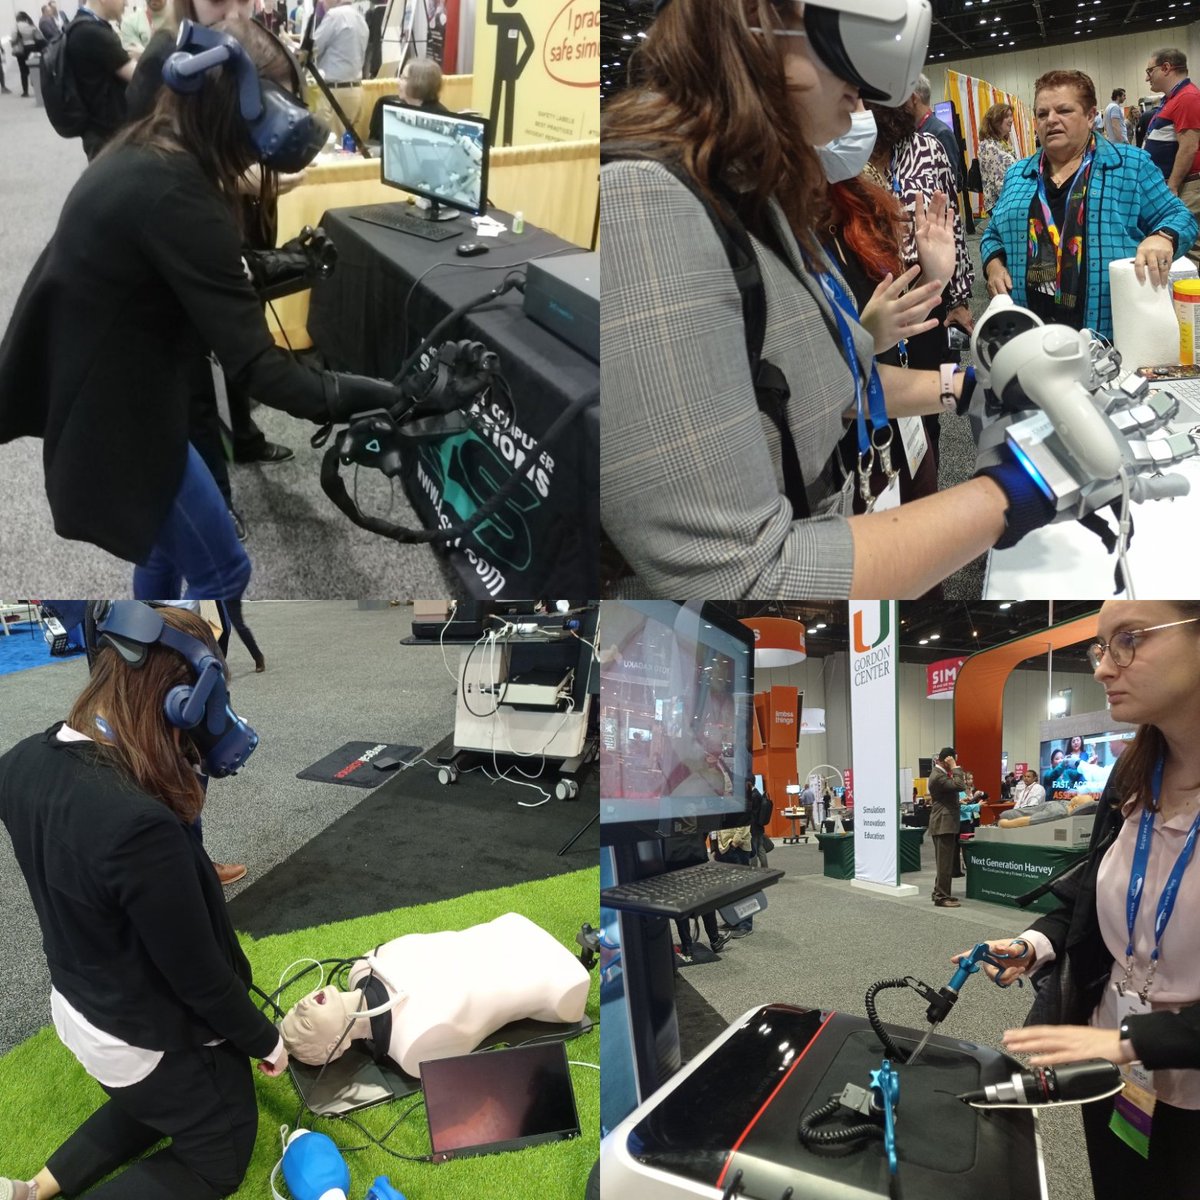 #IMSH23 #day3 yesterday we took some time to explore new solutions combining #vr with #hapticfeedback and we found some cool #commercialsolutions, as well as #researchprojects @SurgicalScience @Ecsorl @jinsils @TAMU #healthcaresimulation #medicalsimulation